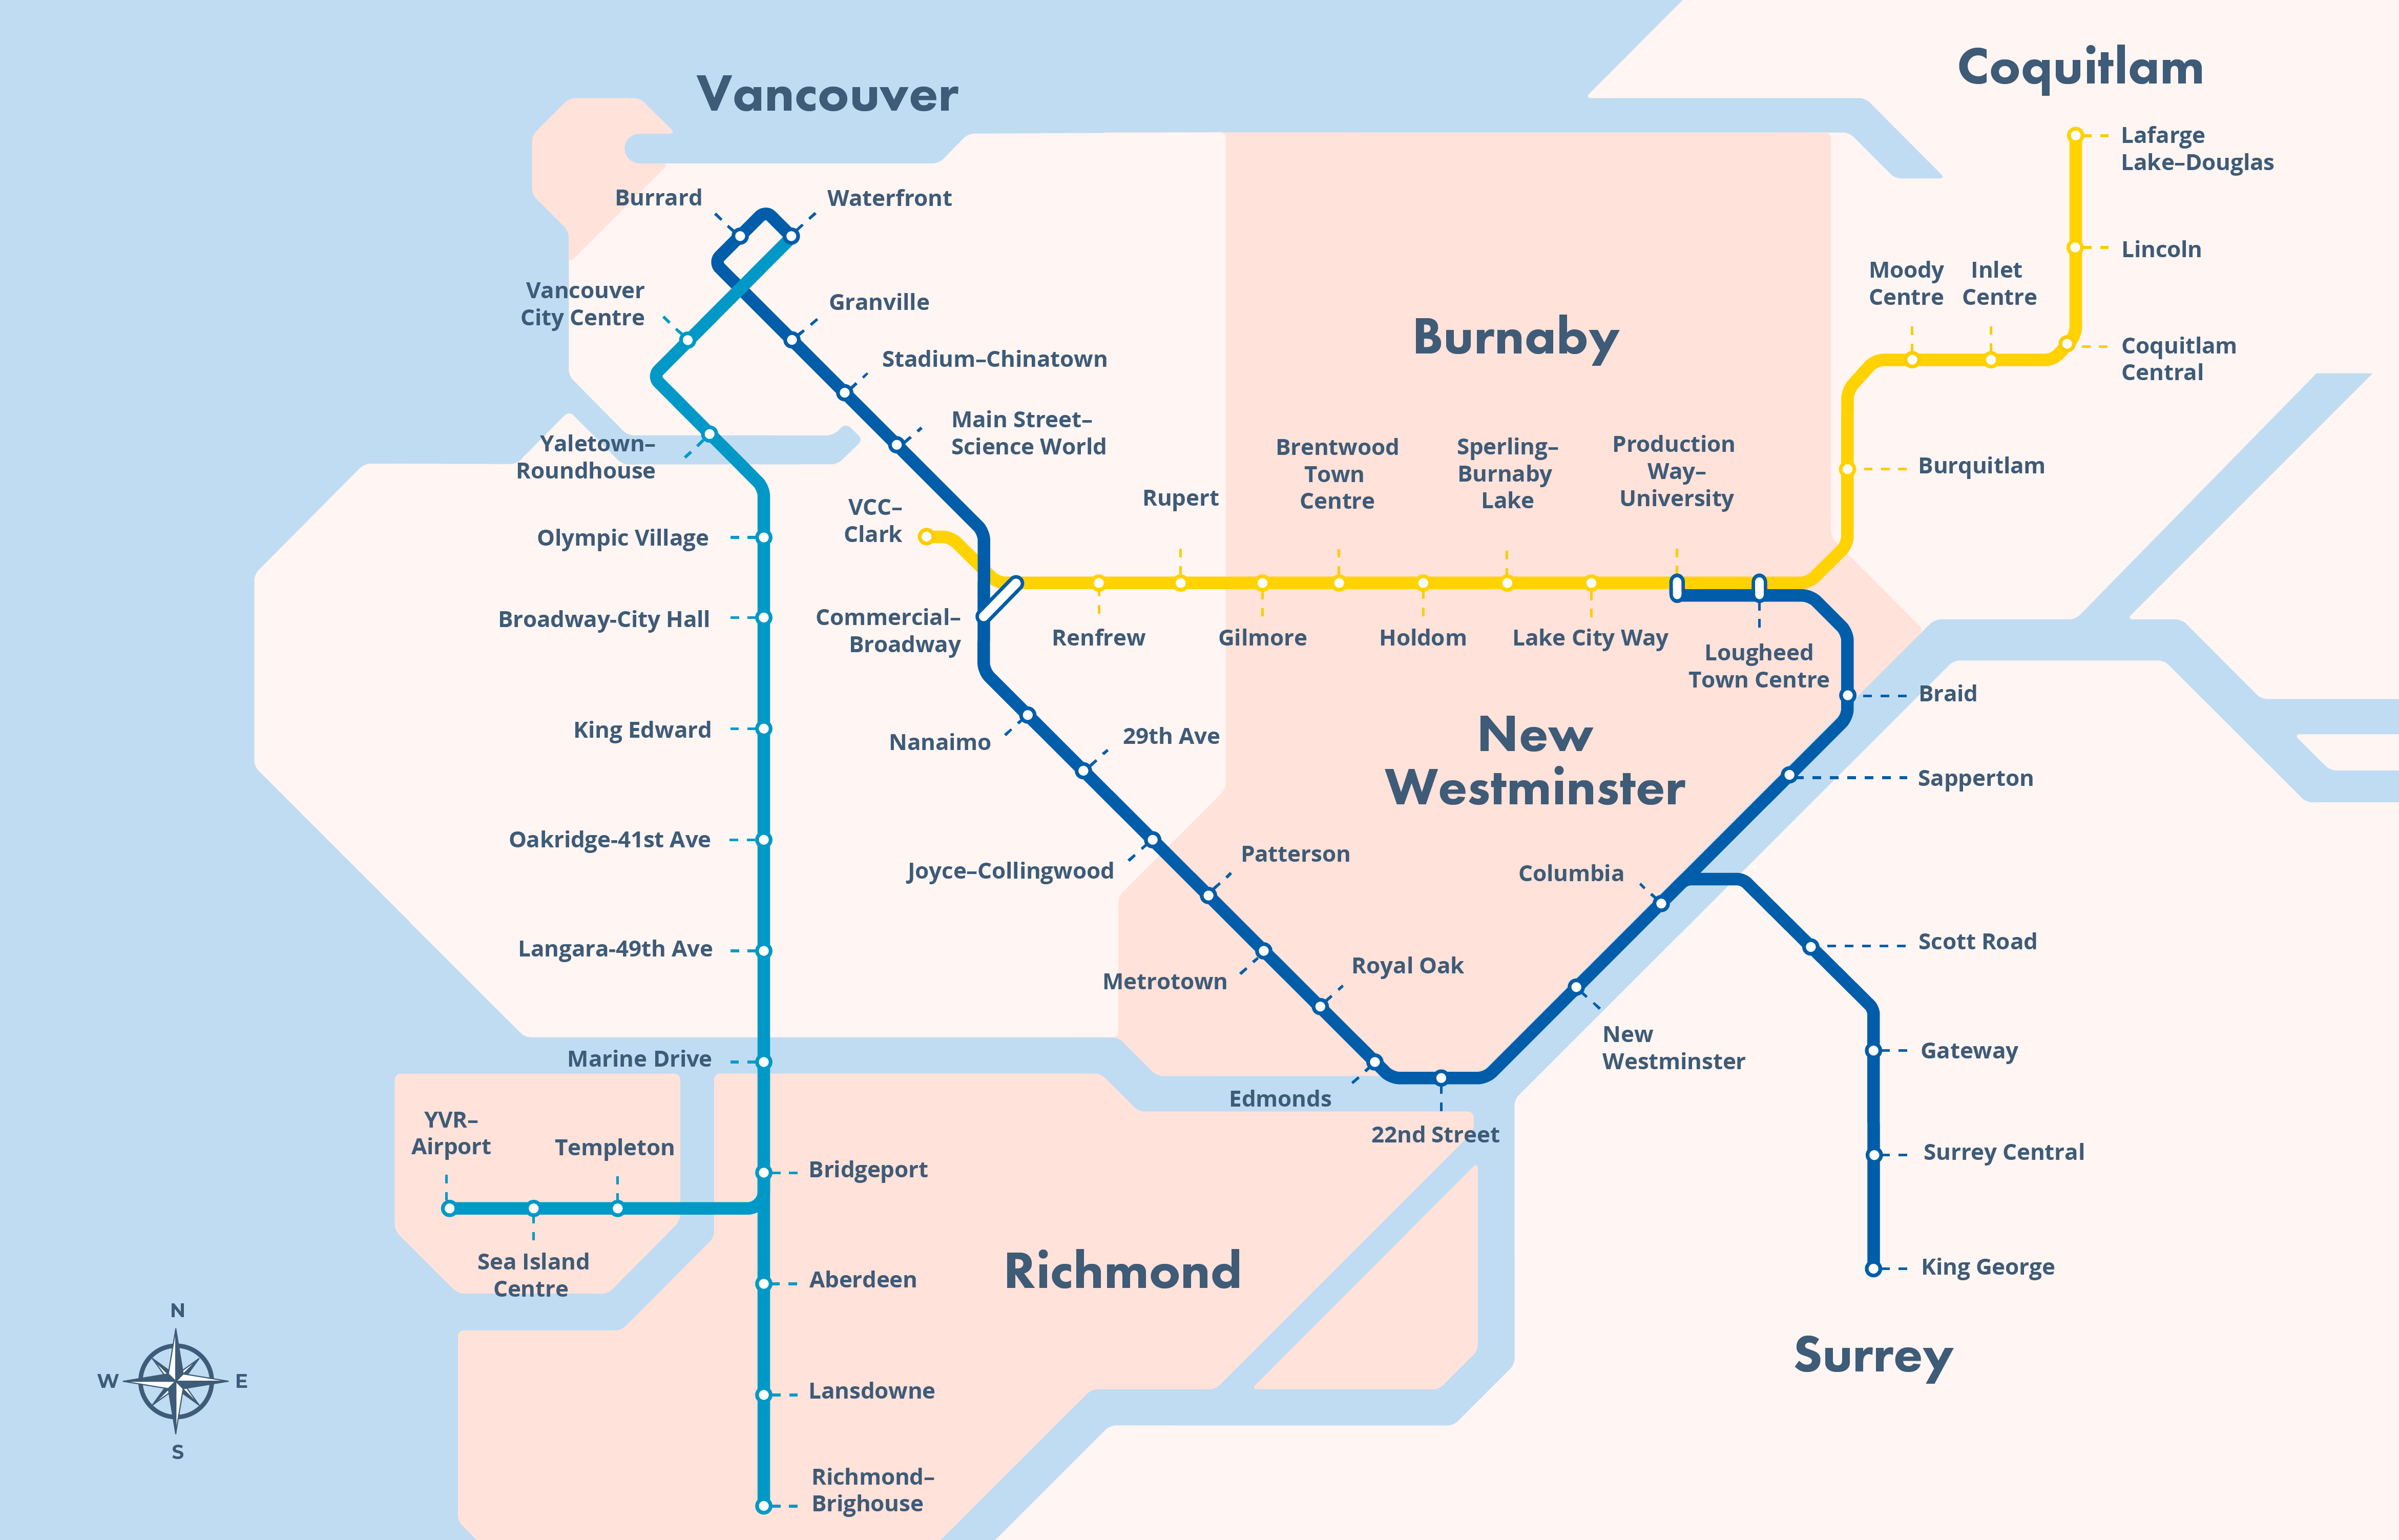 [Updated February 2022] Average Rent Near Transit in Greater Vancouver